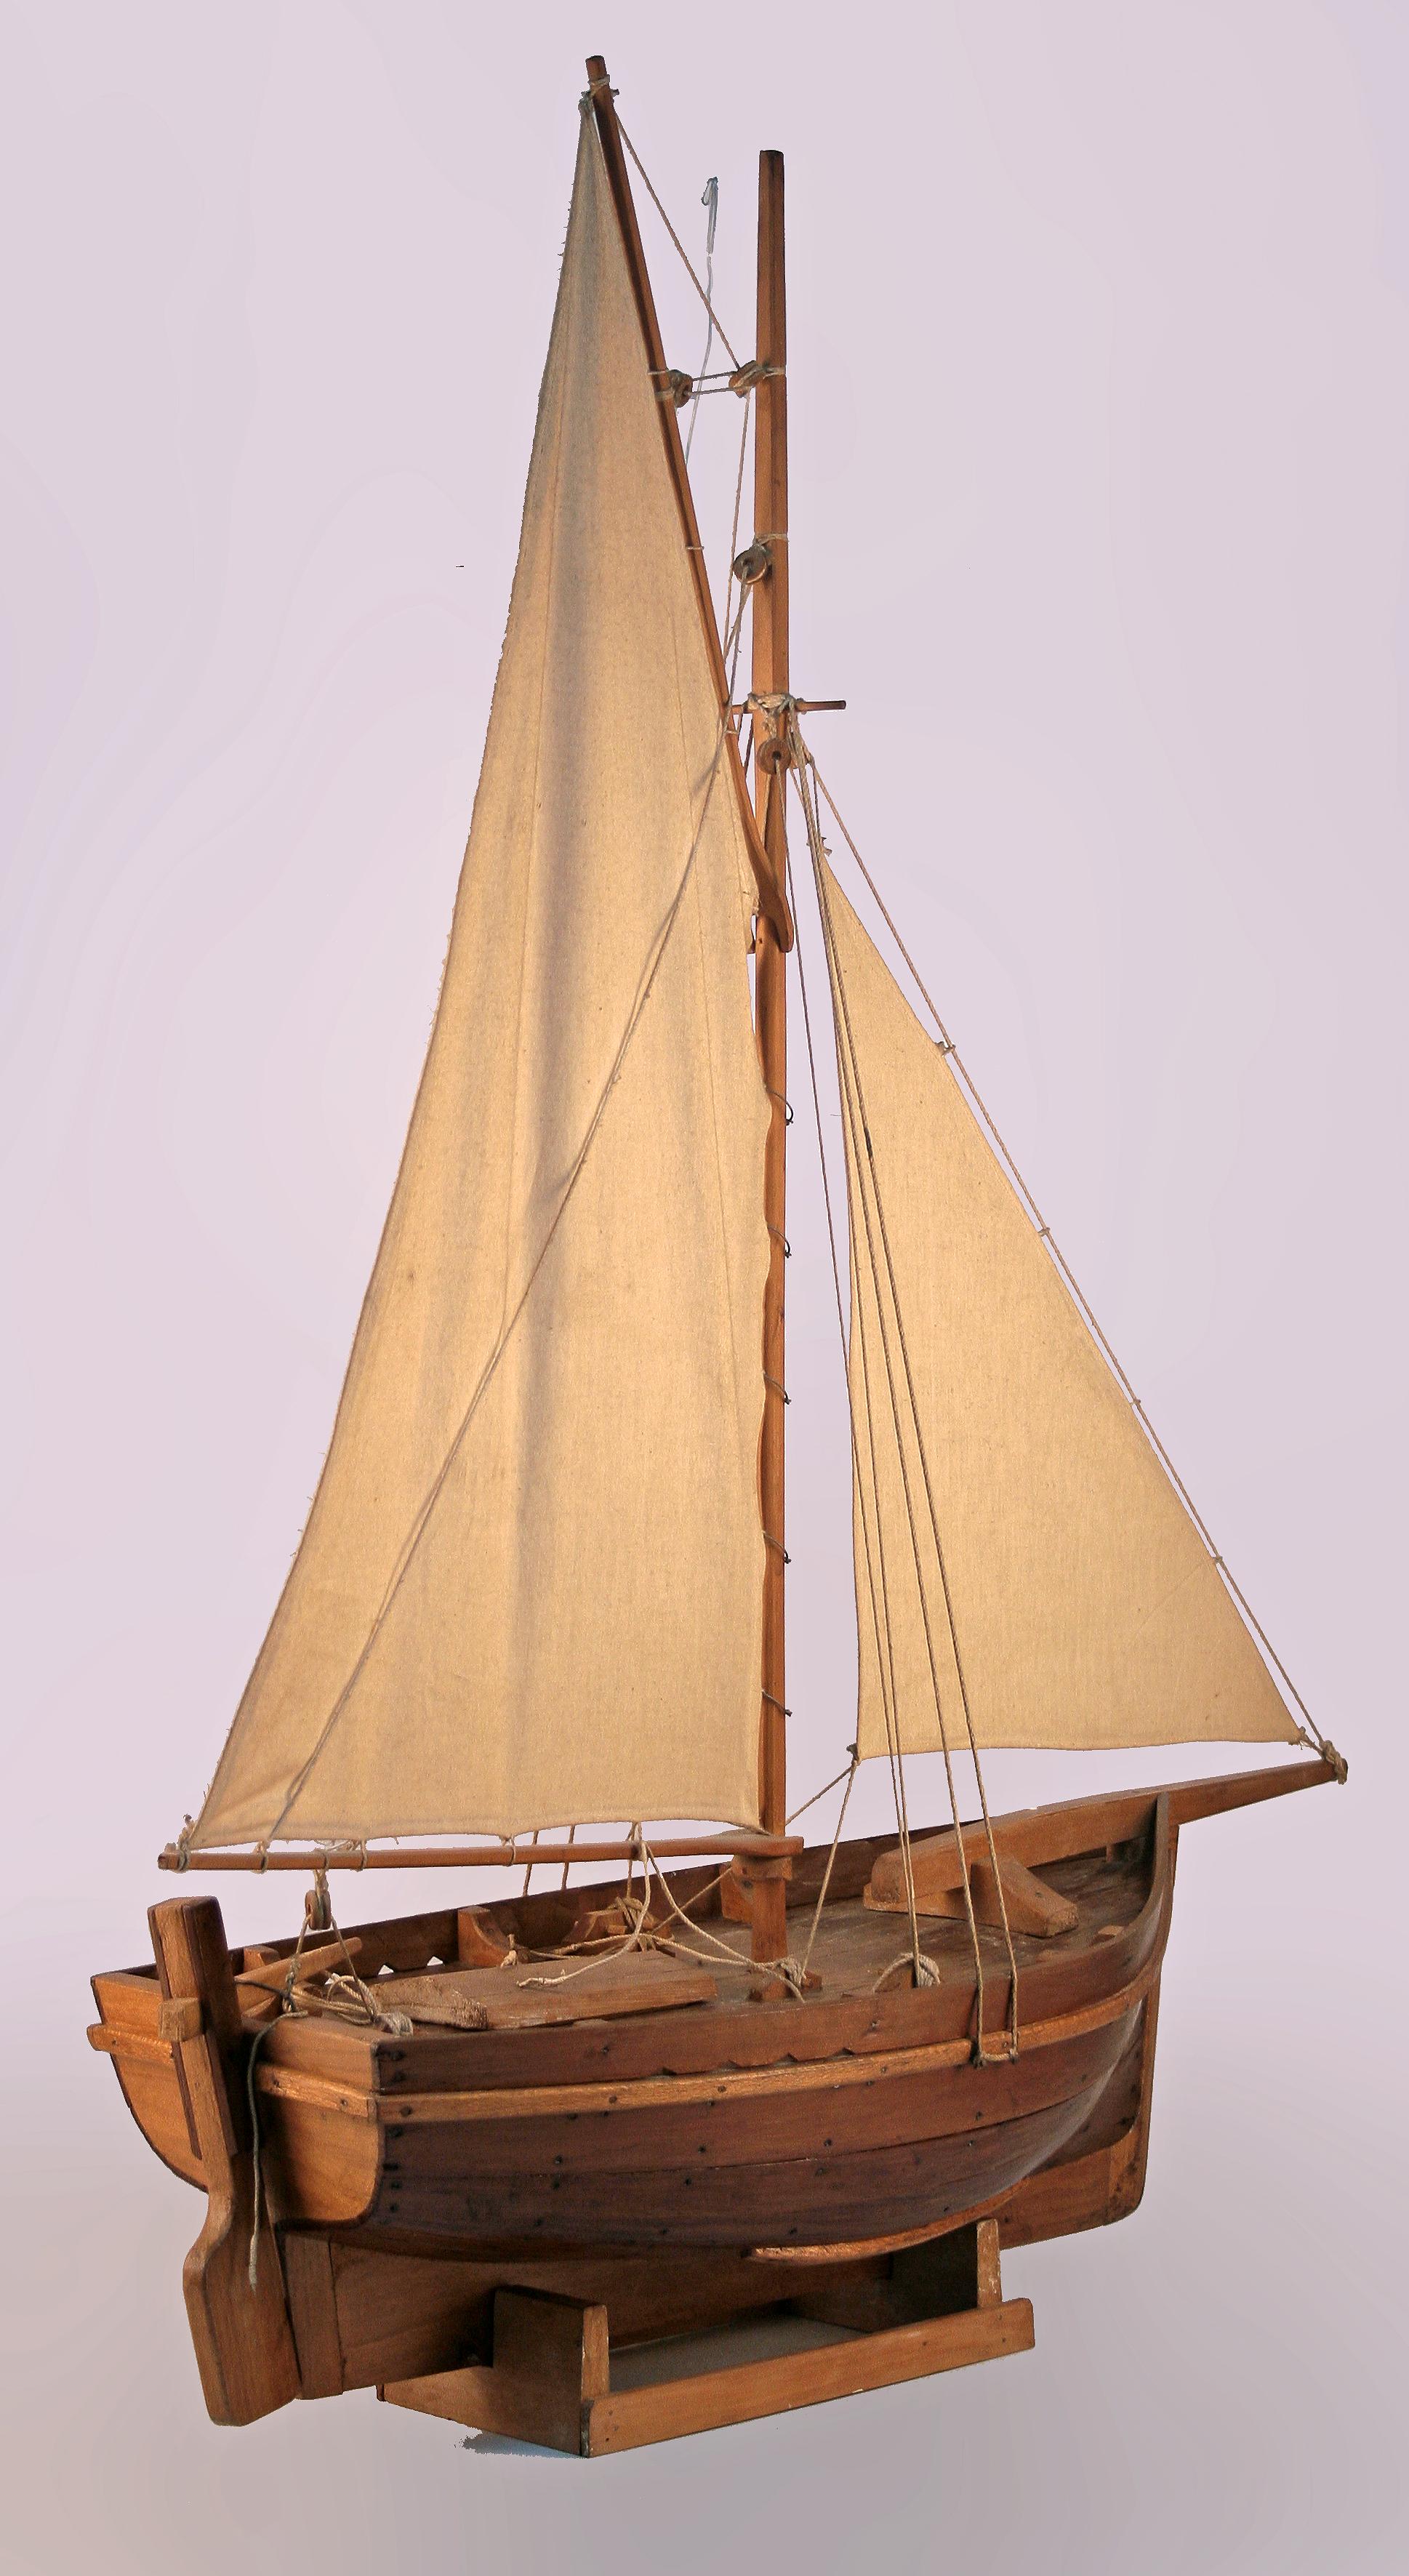 Arts and Crafts Mid-20th C. Wood Model of Antique Fishing Boat Ship With Sails Made in Argentina For Sale